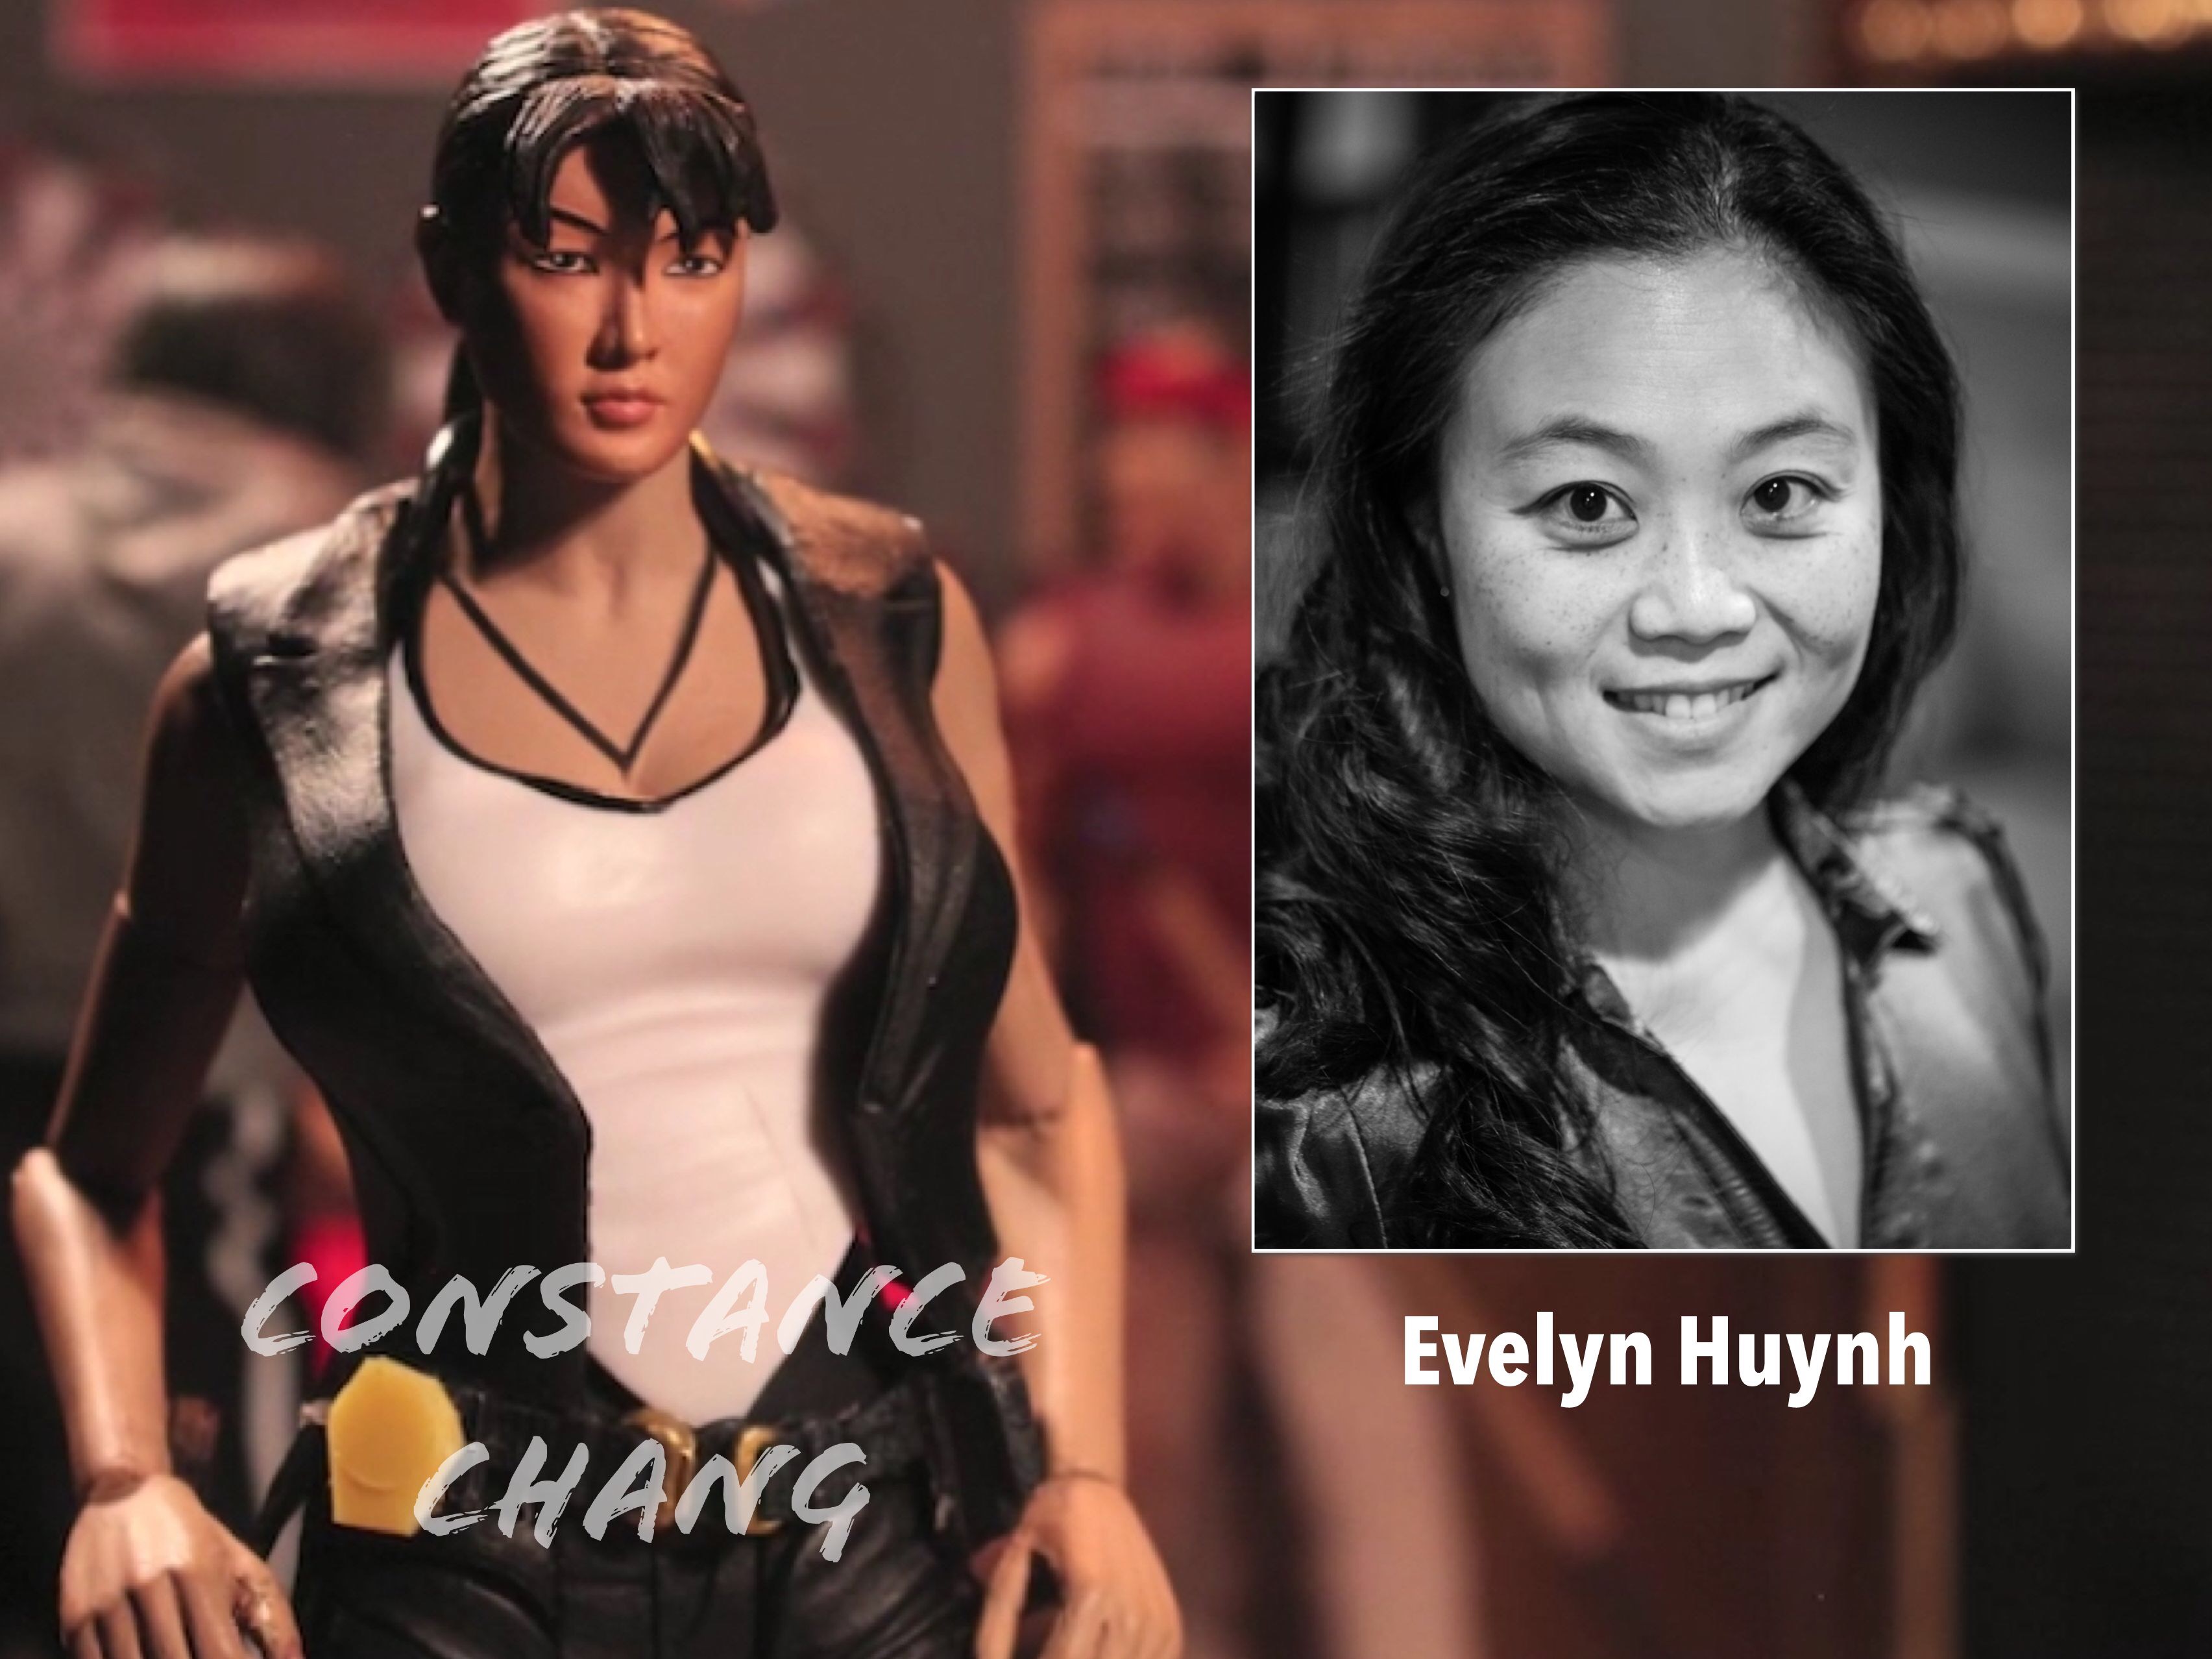 You are currently viewing Constance Chang (Evelyn Huynh)